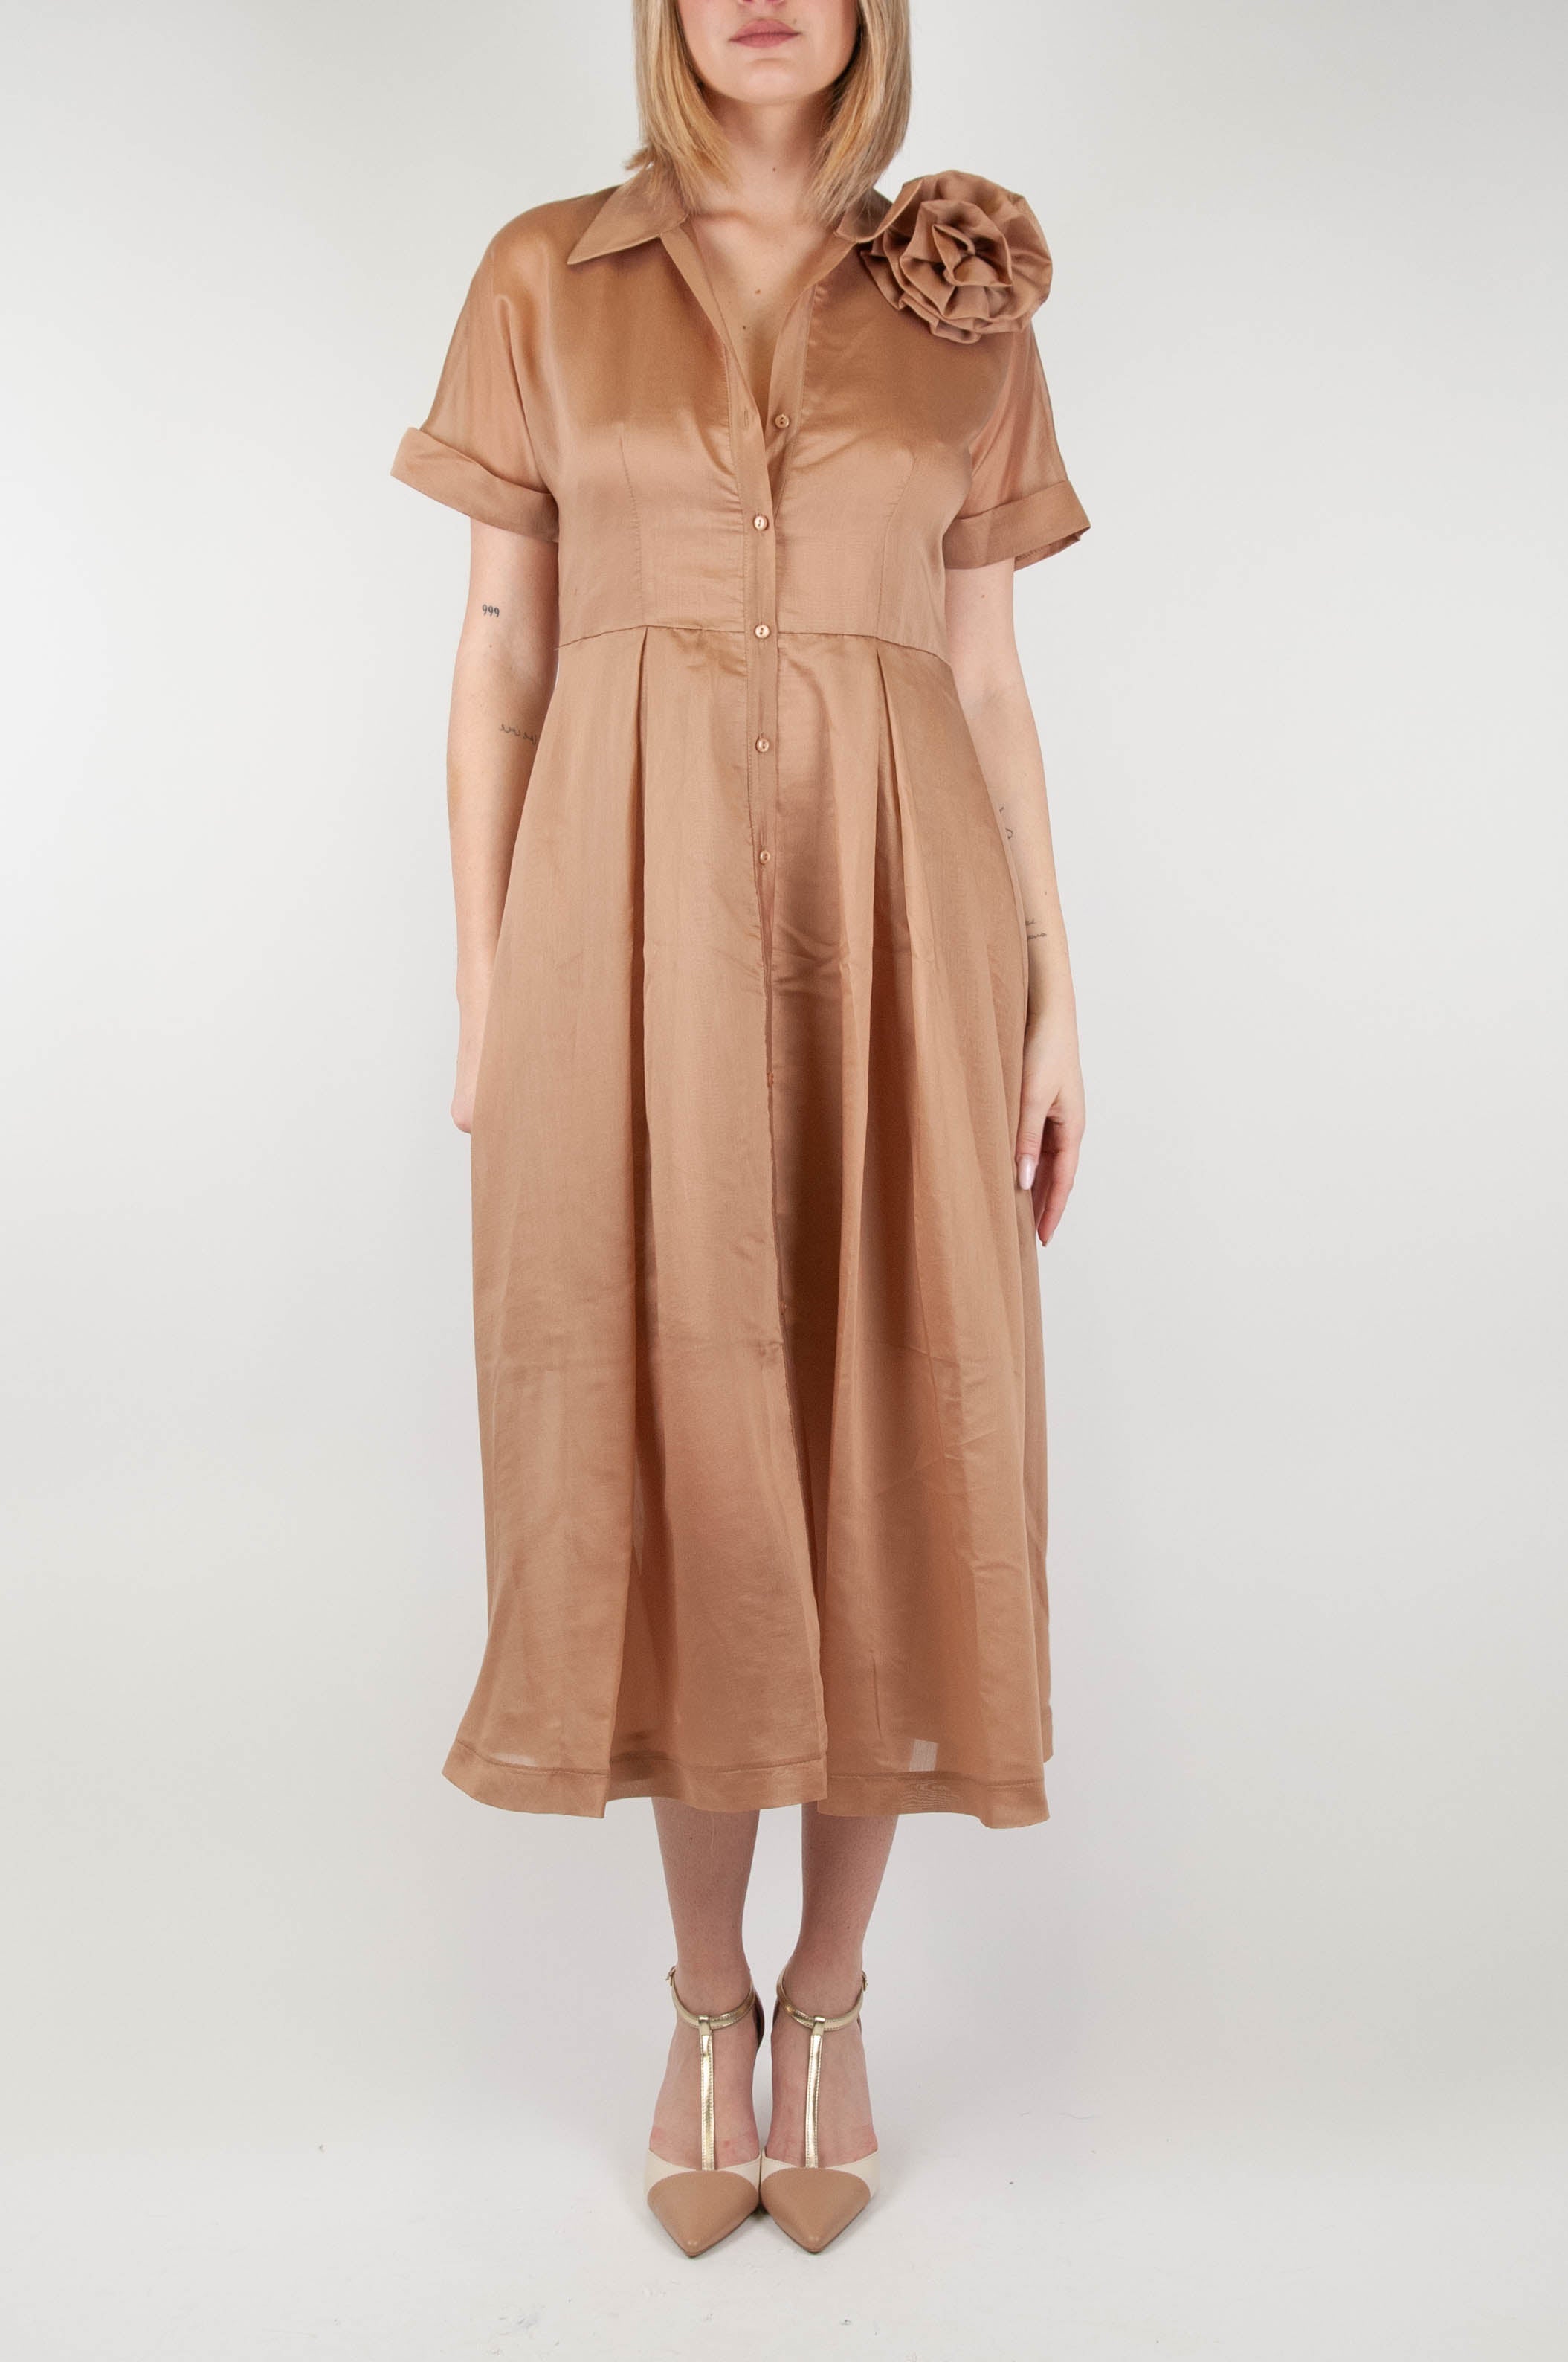 Tension in - Tencel half-sleeved shirtdress with flower brooch